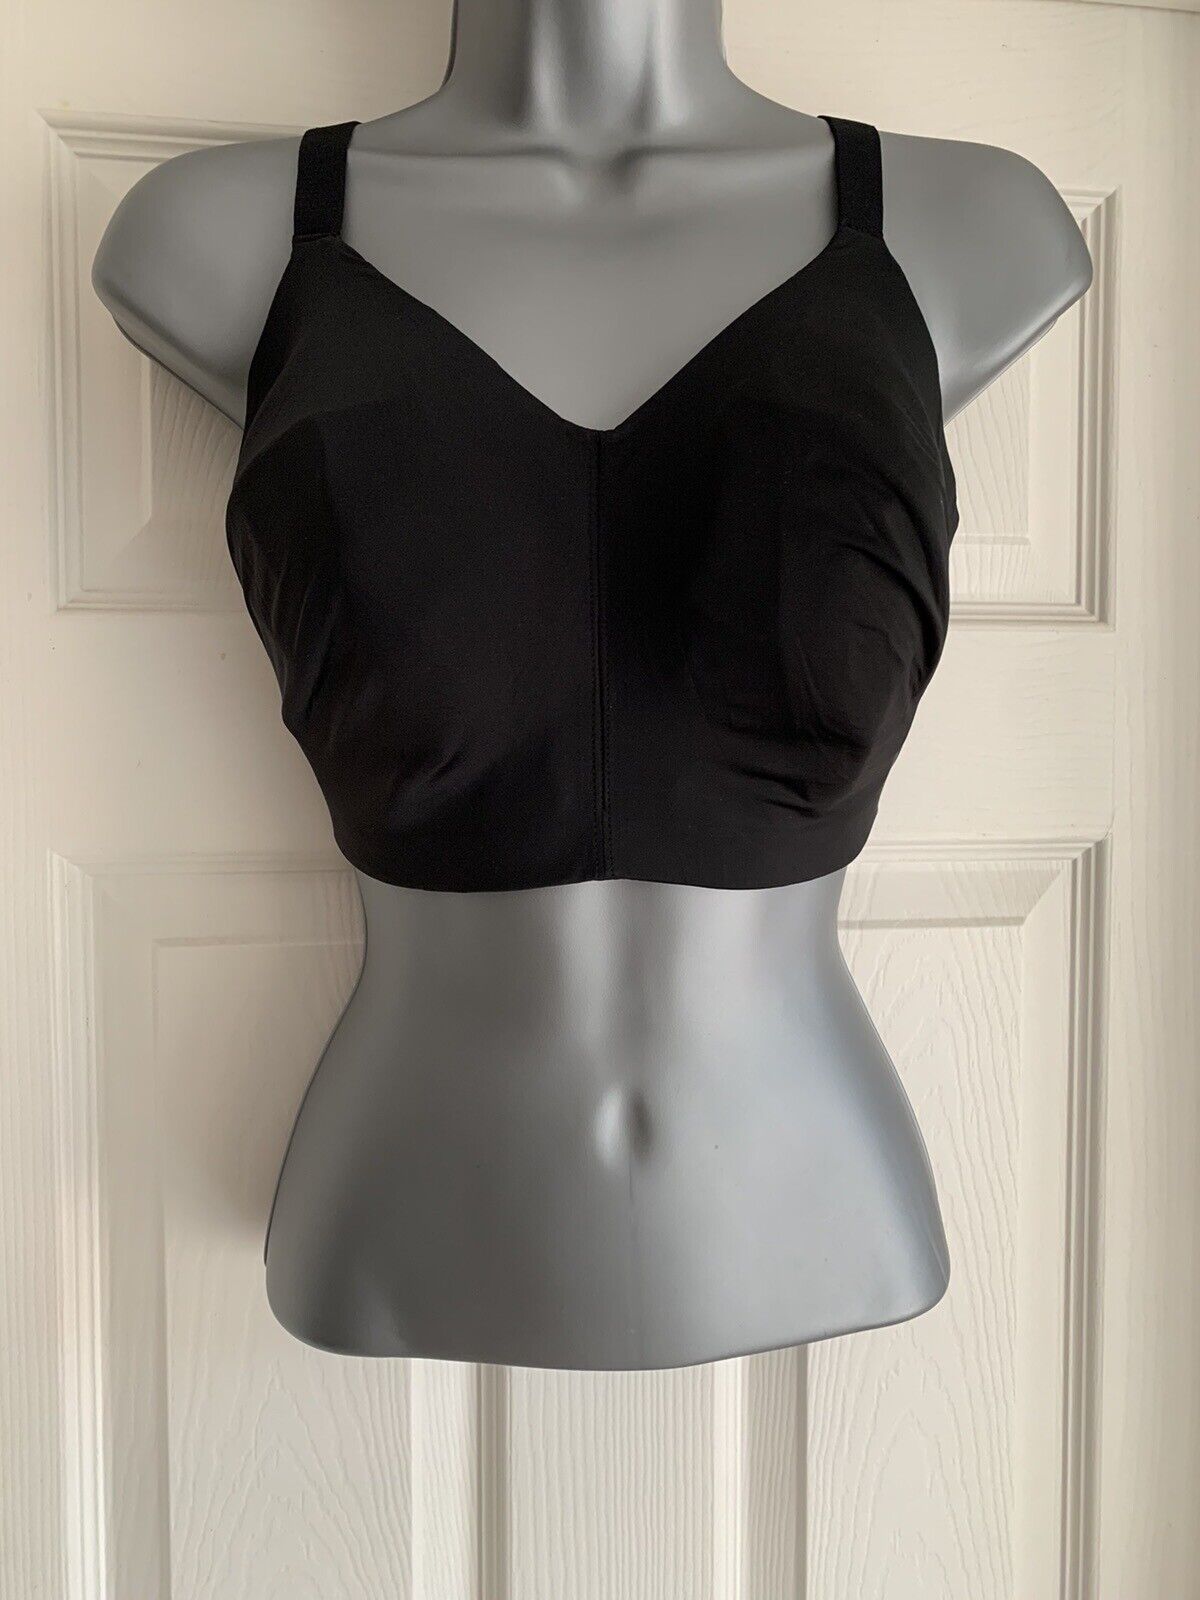 EX M*S Black Flexifit Non-Wired Full Cup Bra in Size 36G – Louise's Closet